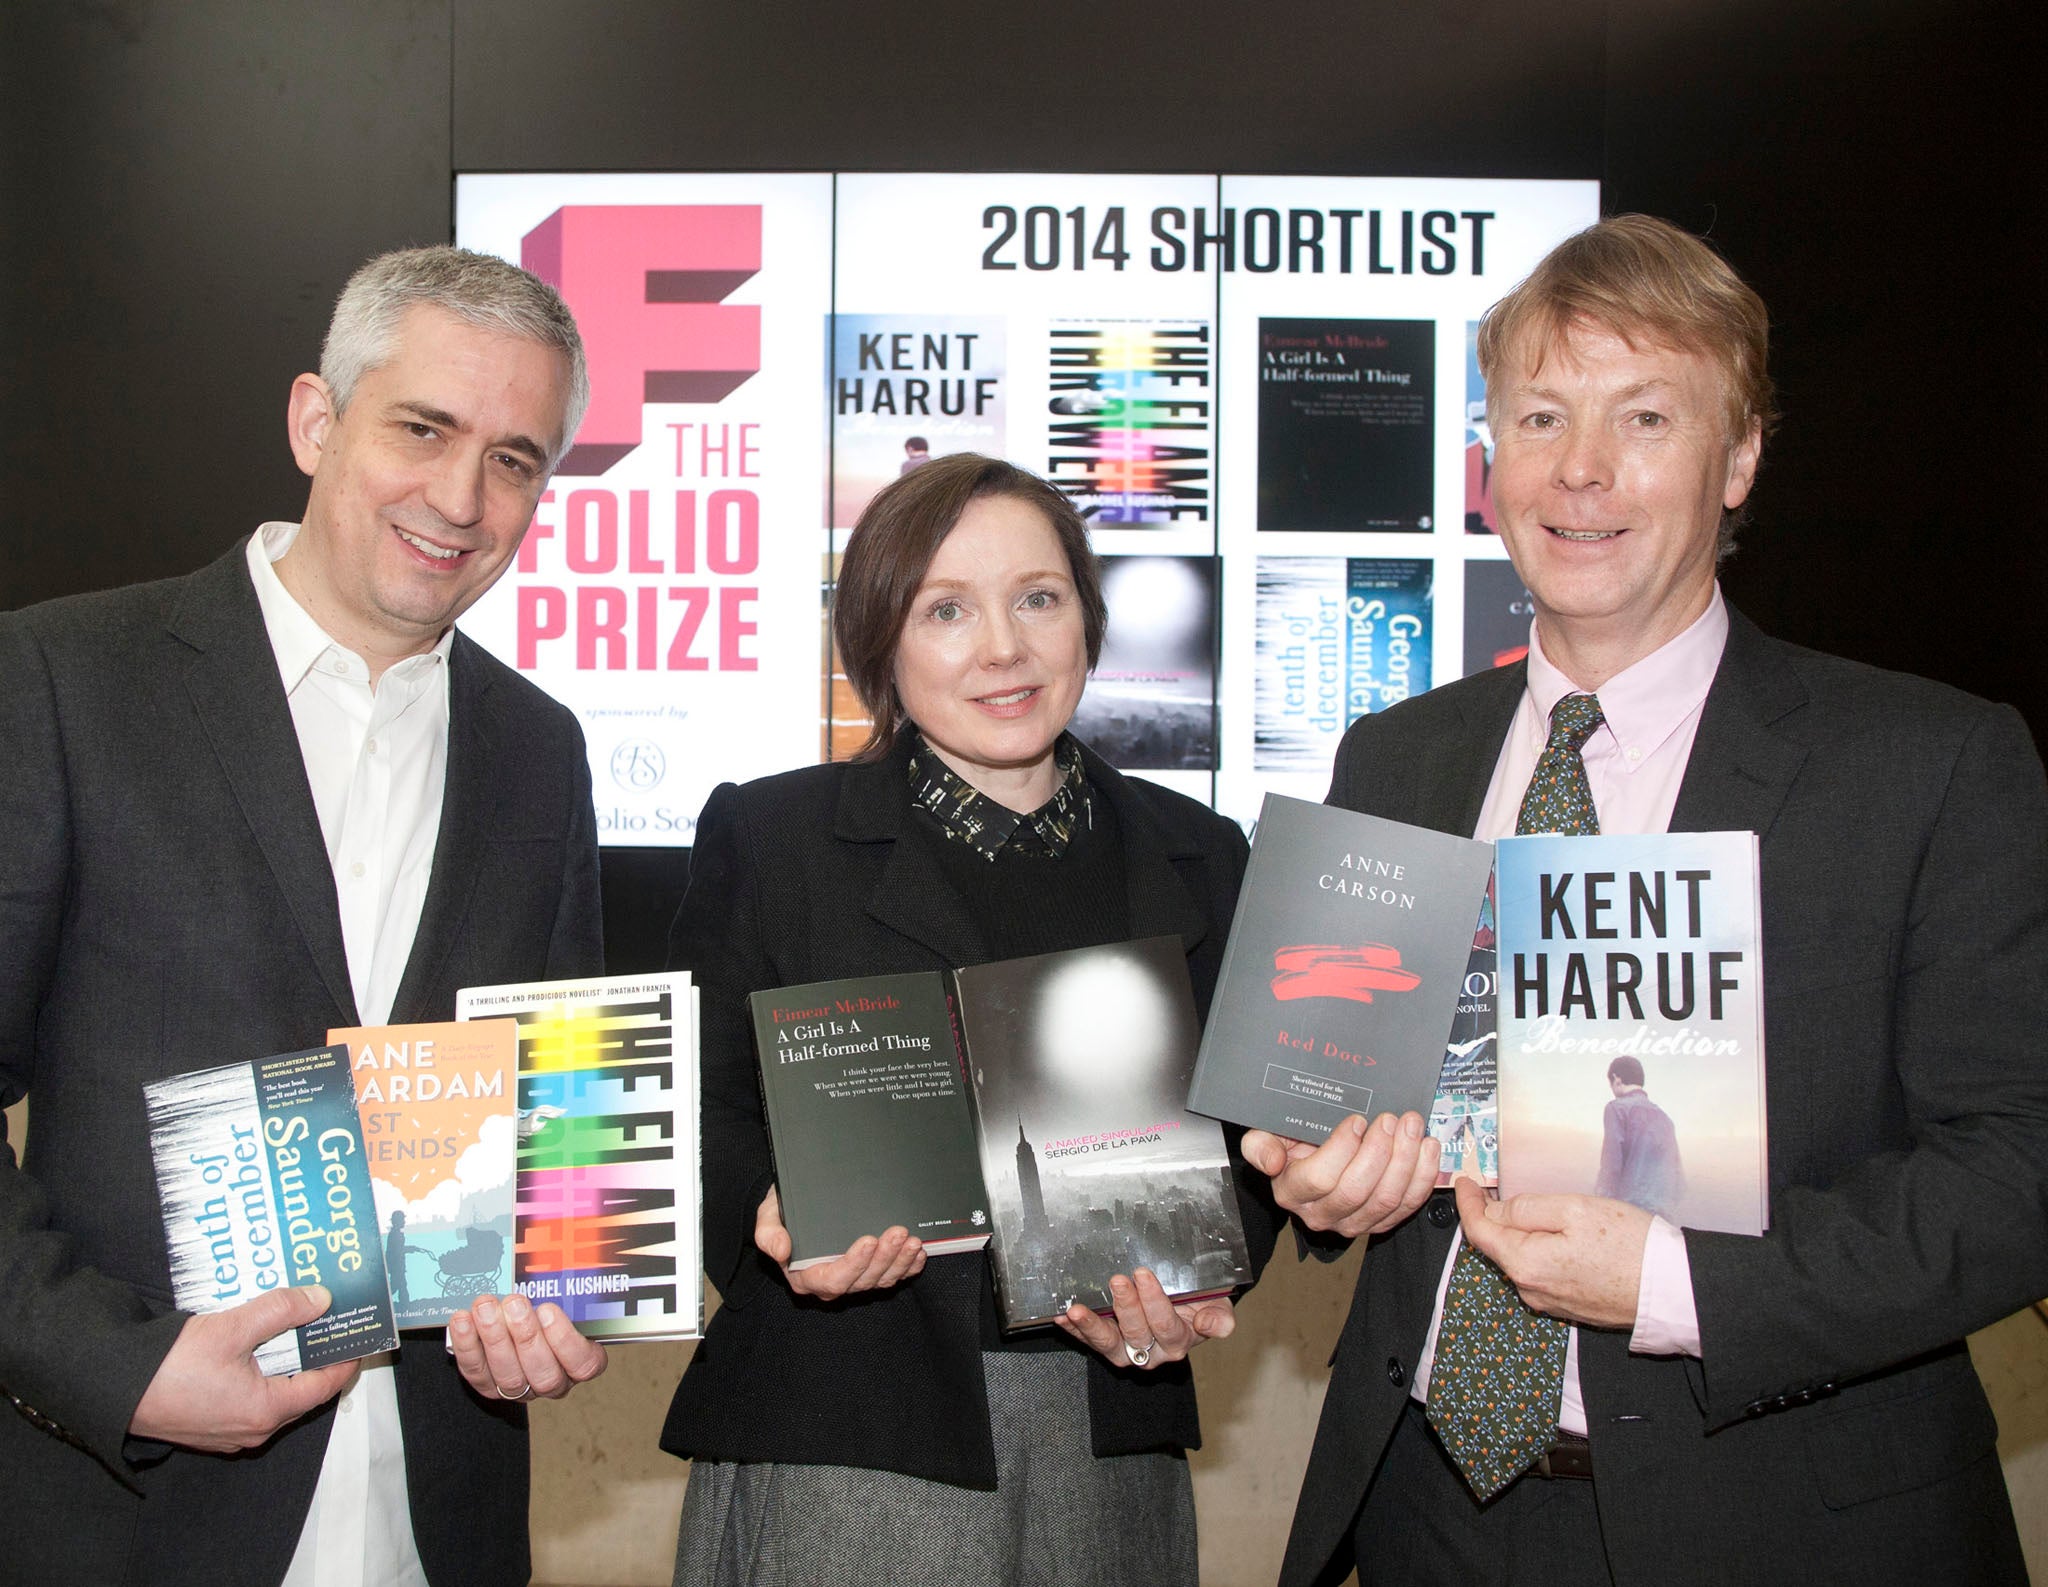 Andrew Kidd, The Folio Prize founder, Lavinia Greenlaw, Chair of Judges and Toby Hartwell, the MD of The Folio Society as they announce the shortlist for the Folio Prize 2014